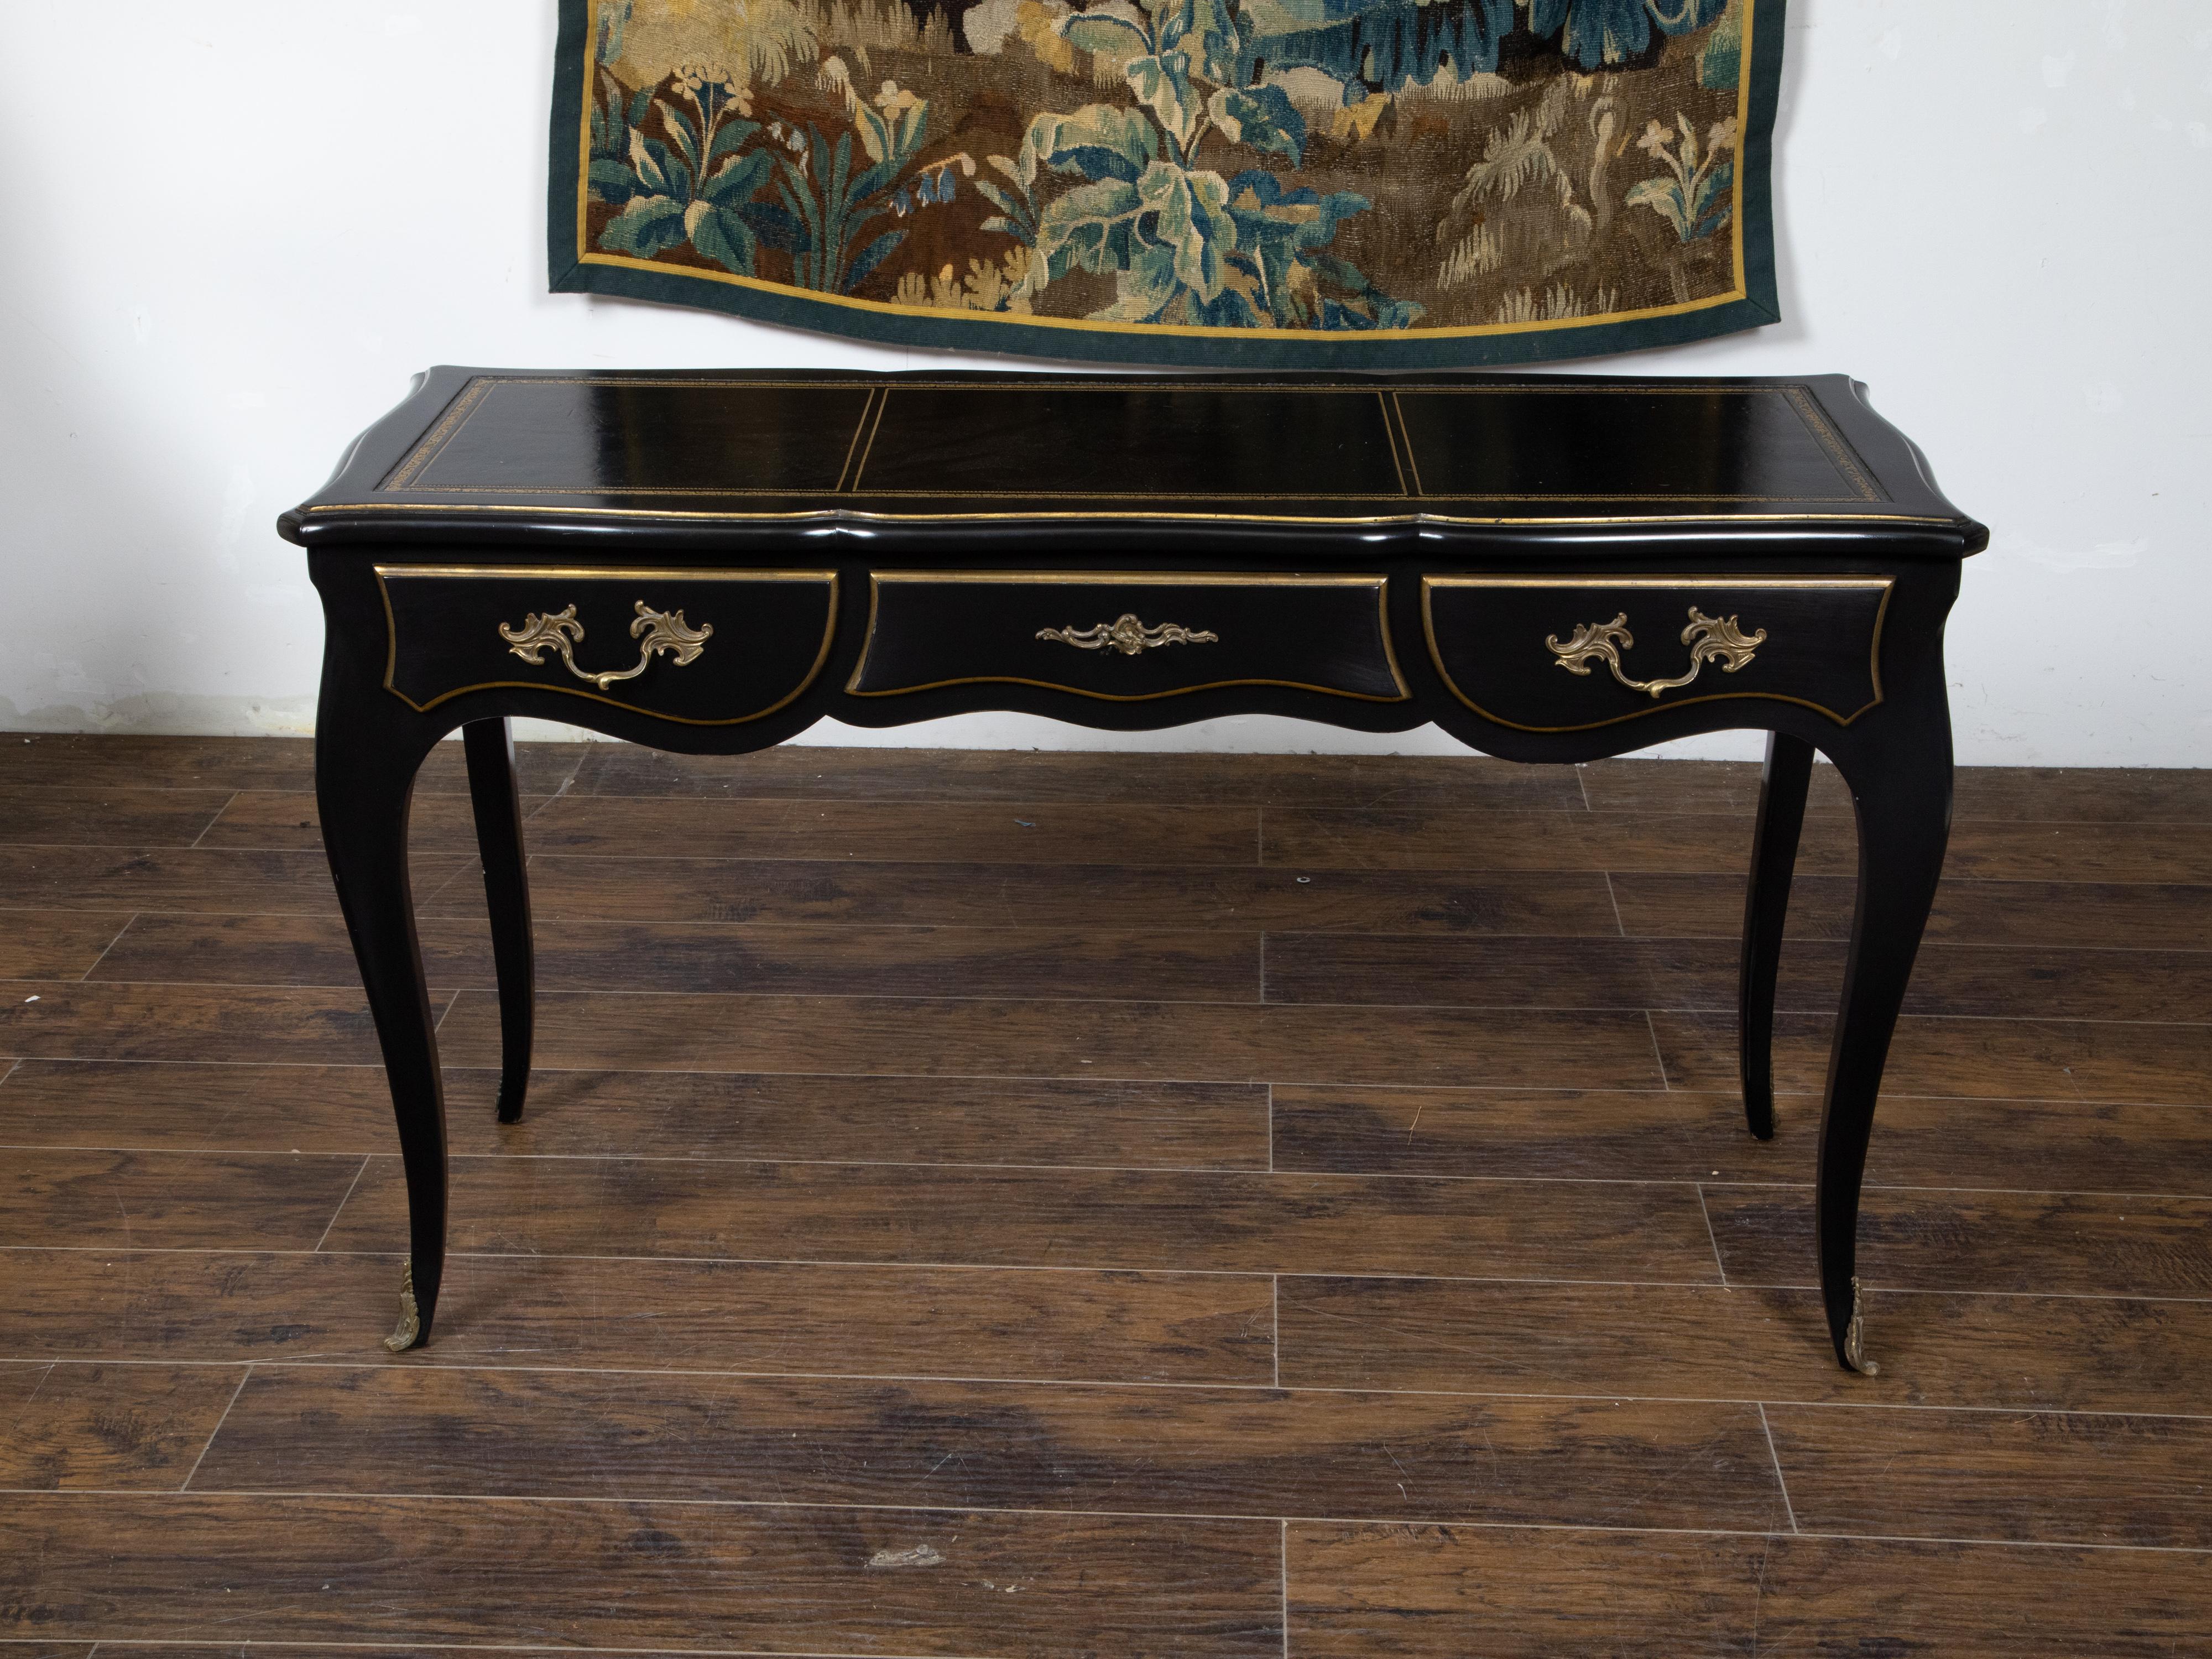 A Louis XV French style black lacquered desk from the mid 20th century by maker Auffray and Co, with leather top, gilt accents, bronze mounts and three drawers. Created during the Midcentury period, this black lacquer desk, made by Auffray and Co